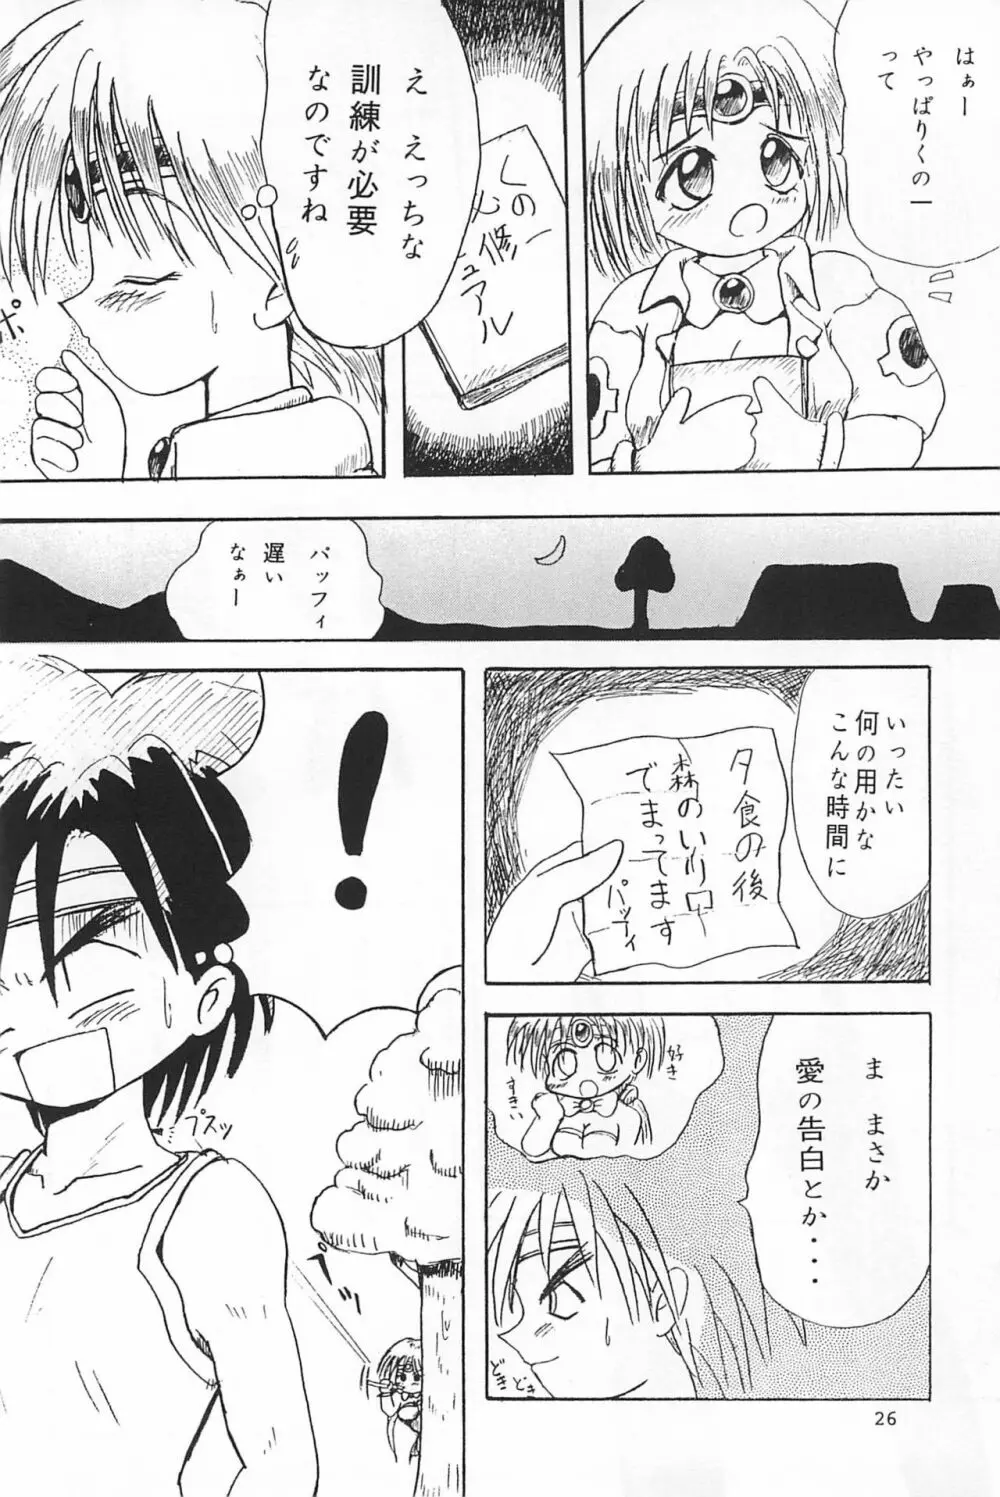 ND-special Volume 1 Page.26